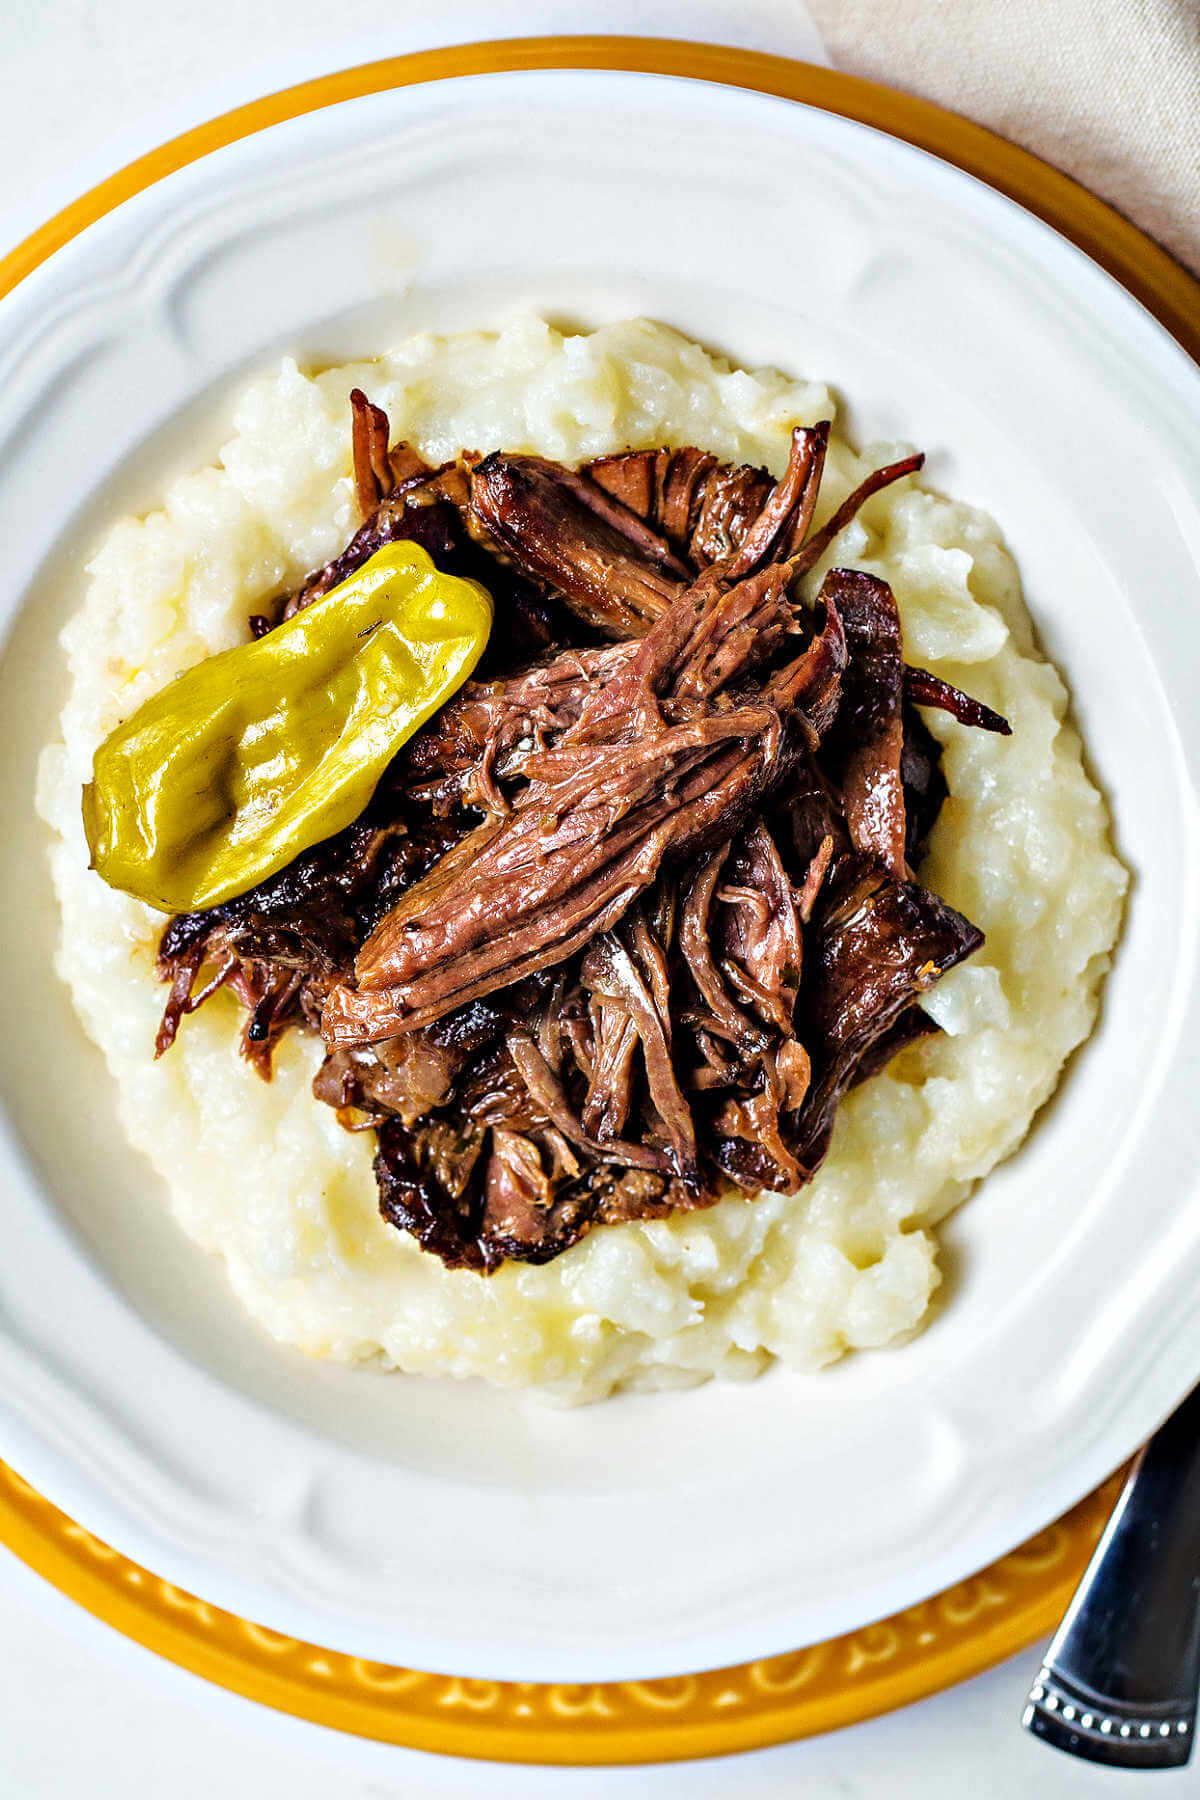 shredded Mississippi pot roast piled on top of a mound of mashed potatoes.